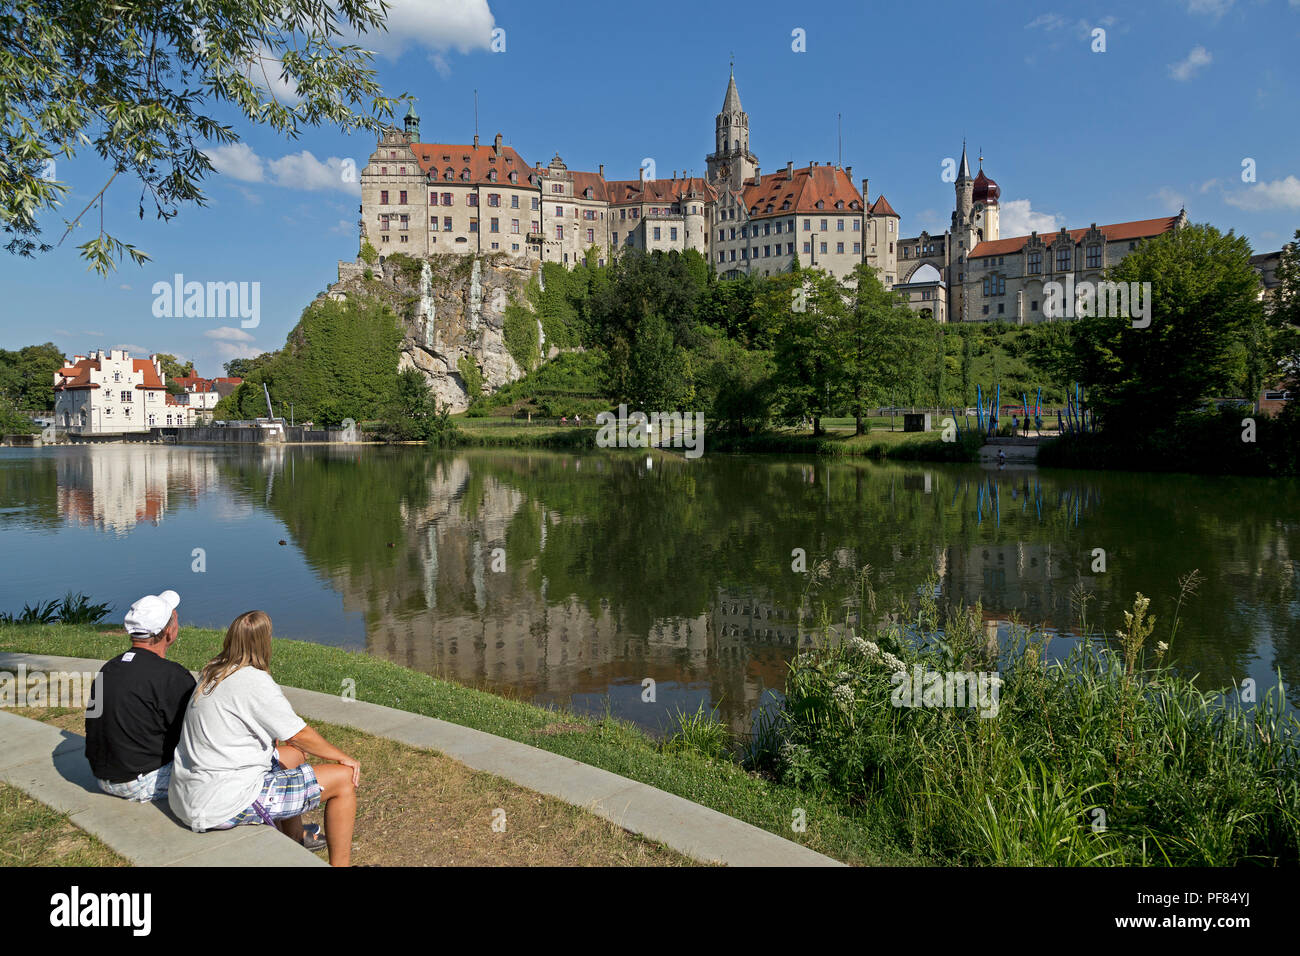 castle and River Danube, Sigmaringen, Baden-Wuerttemberg, Germany Stock Photo